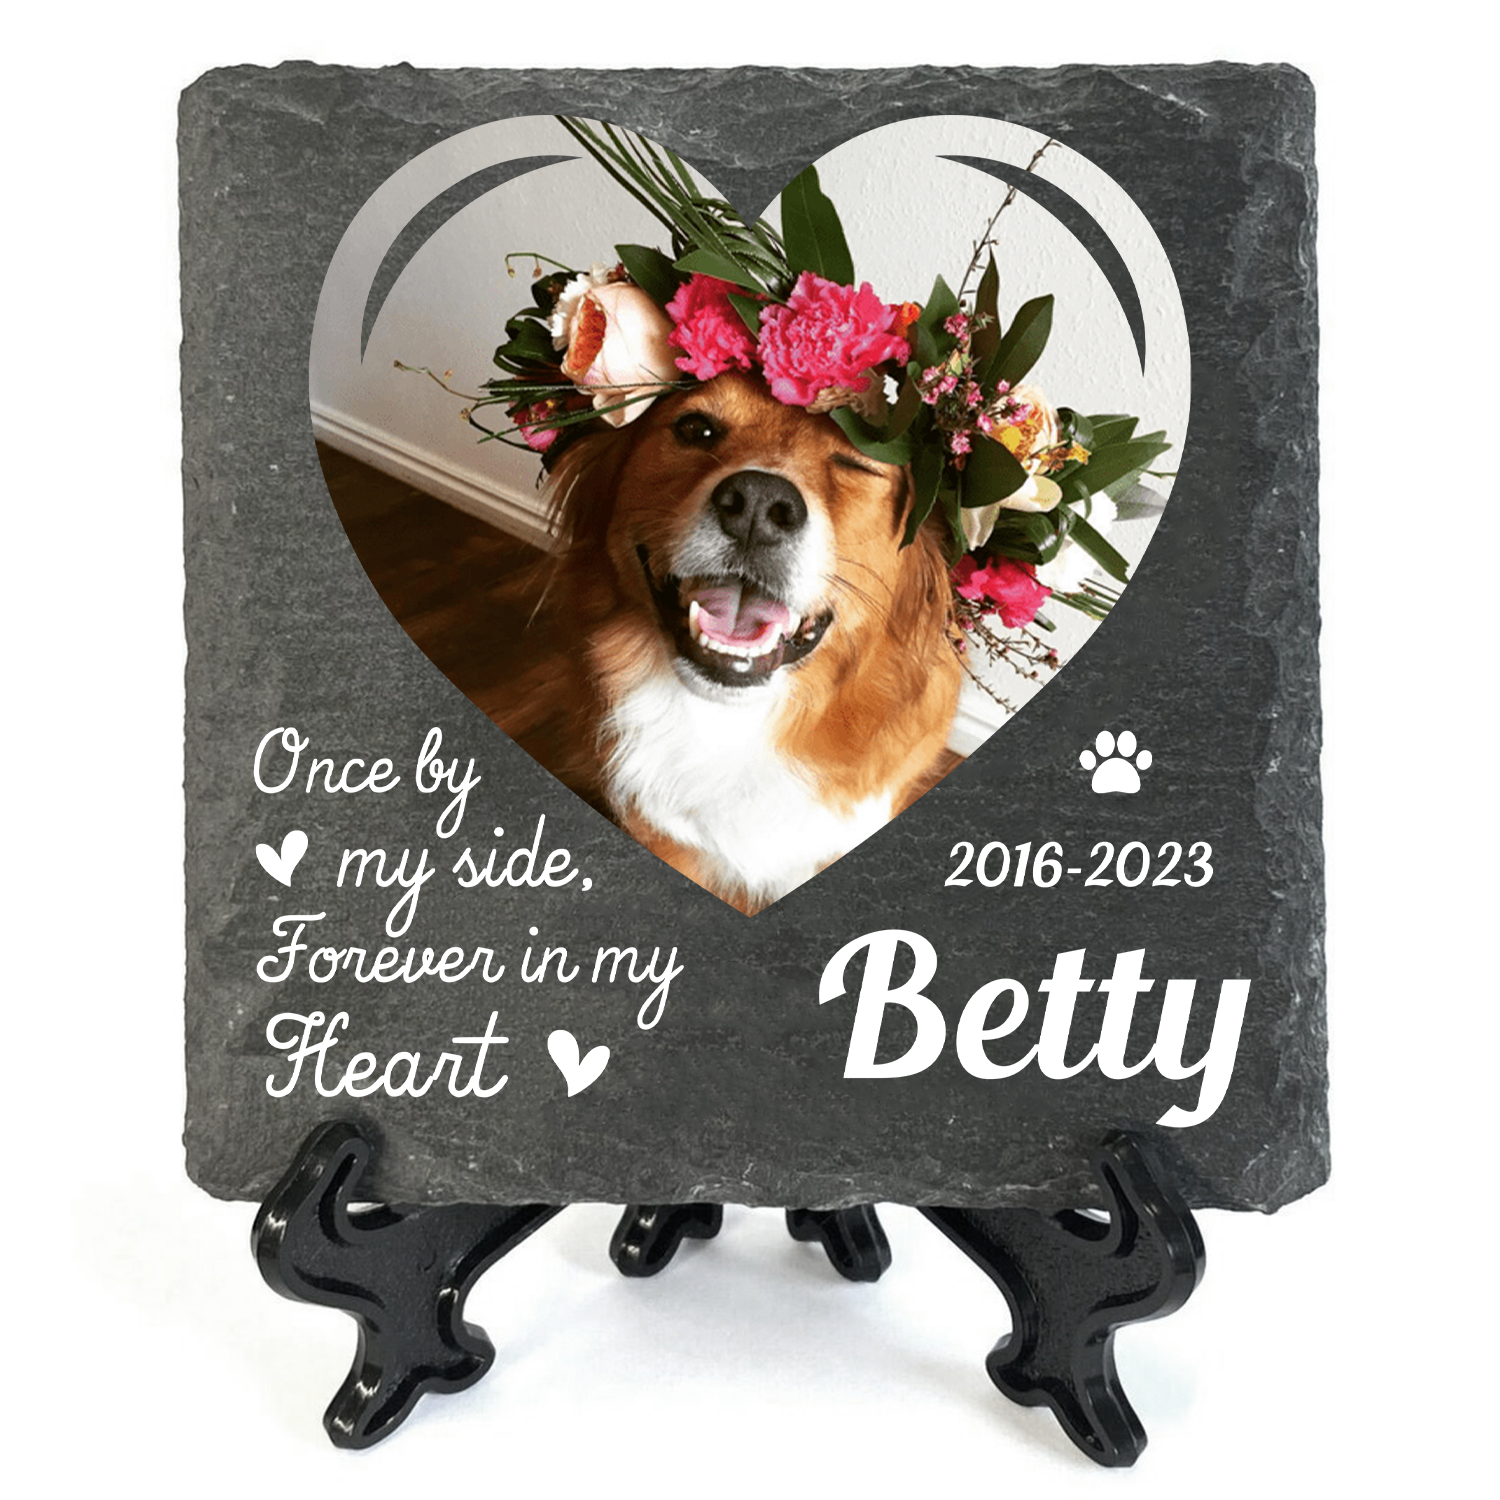 Heart Dog Photo Once By My Side Forever In My Heart Custom Dog Memorial Stone, Pet Memorial Gifts - Personalized Custom Memorial Tomstone